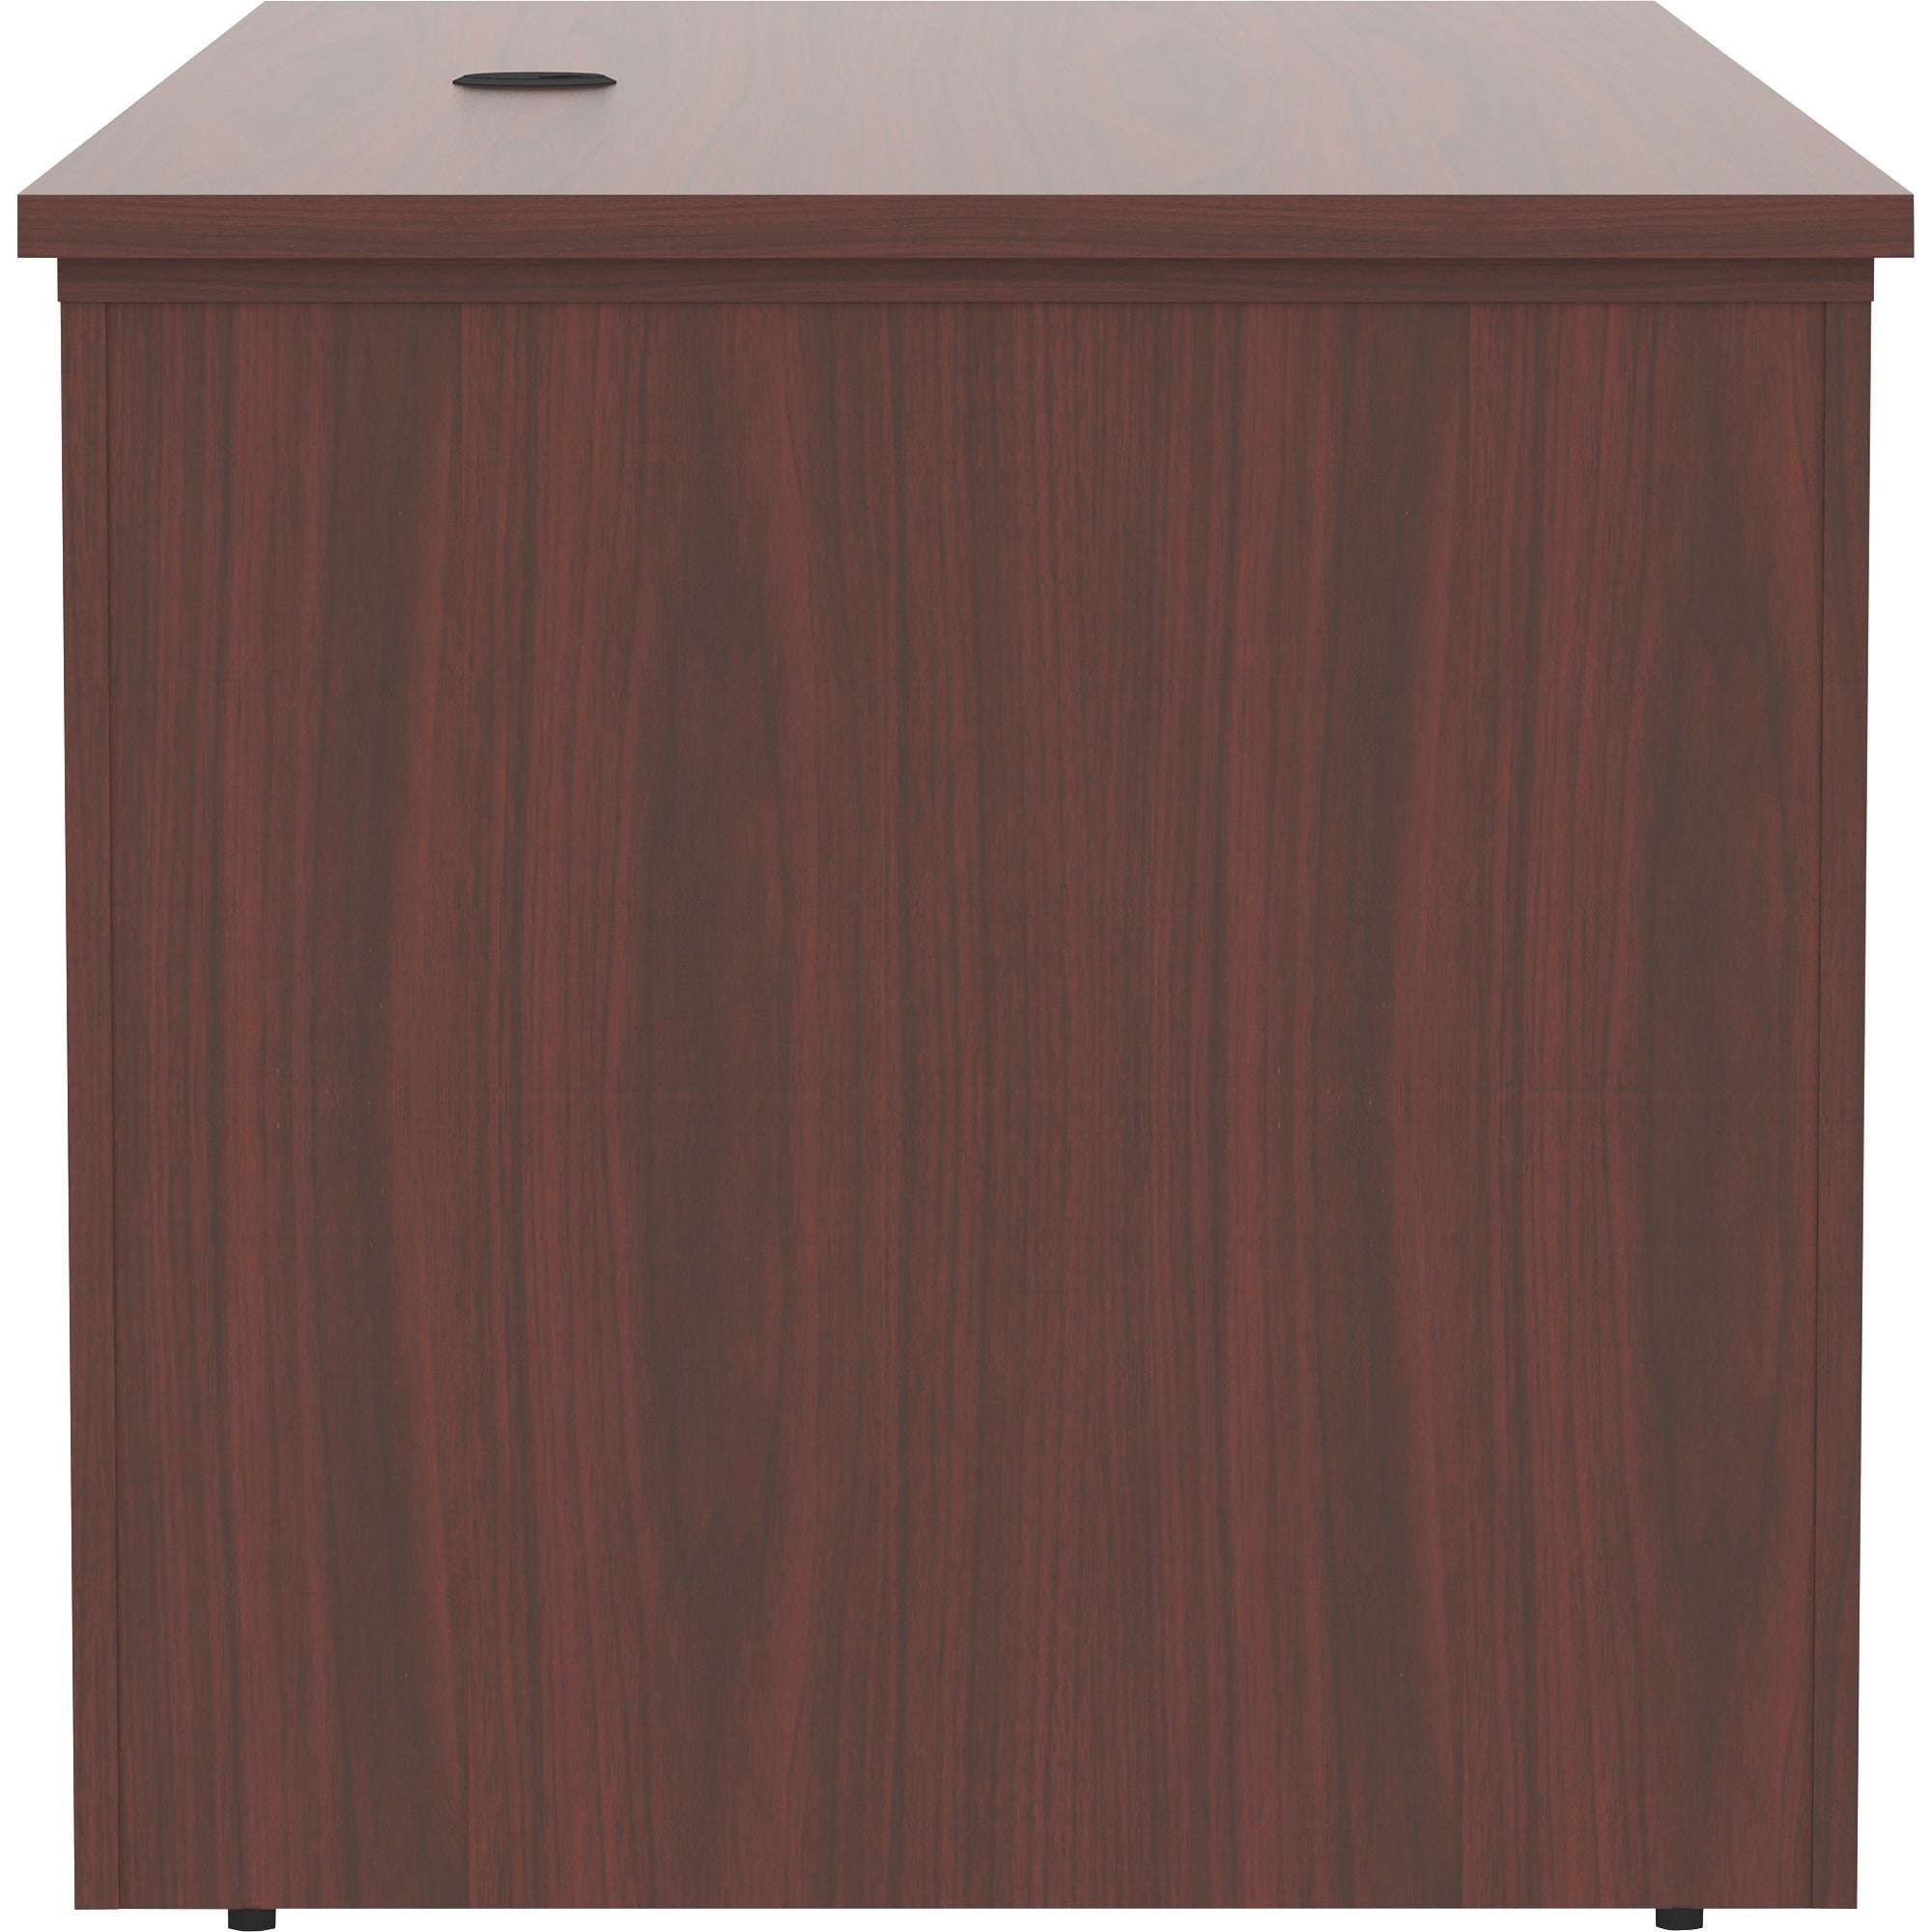 lorell-essentials-series-sit-to-stand-desk-shell-01-top-1-edge-72-x-2949-finish-mahogany-laminate-table-top_llr69574 - 3